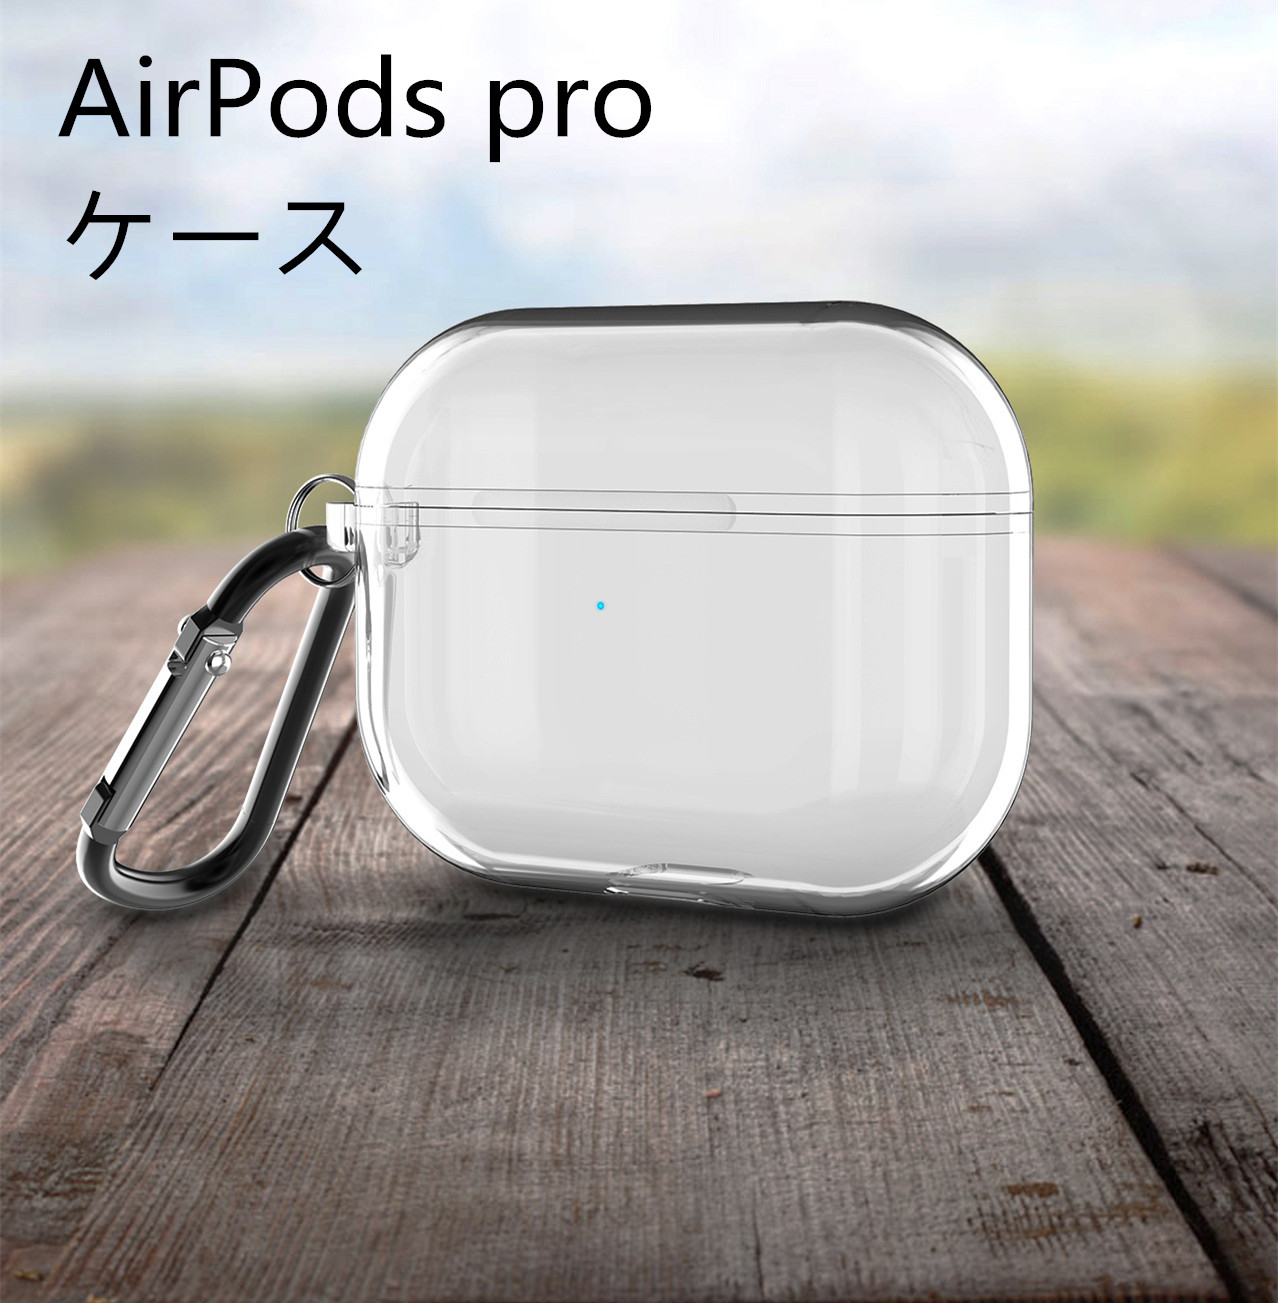 AirPods proケース クリアケース airpods3 airpods Pro イヤホンカバー  AirPodsケース airpods pro case